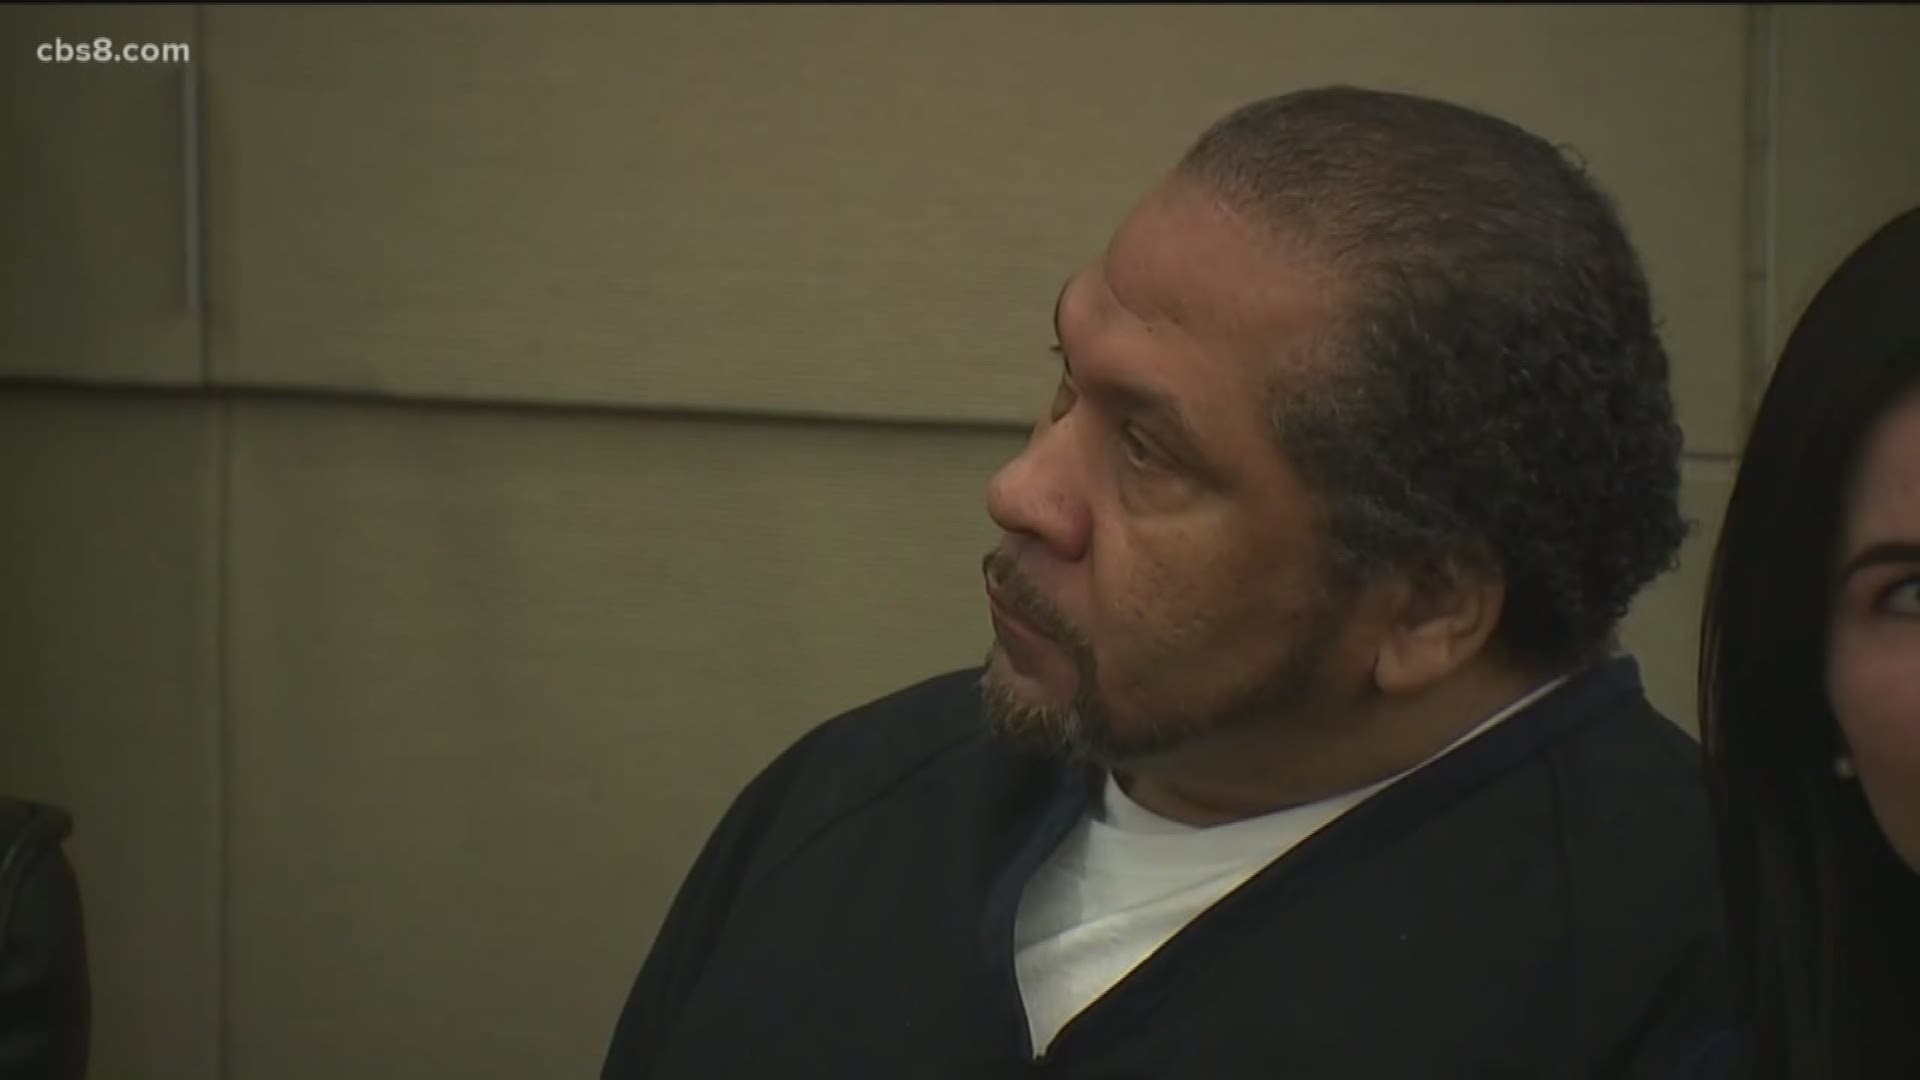 A 61-year-old man is being sentenced for killing a 36-year-old father of five.